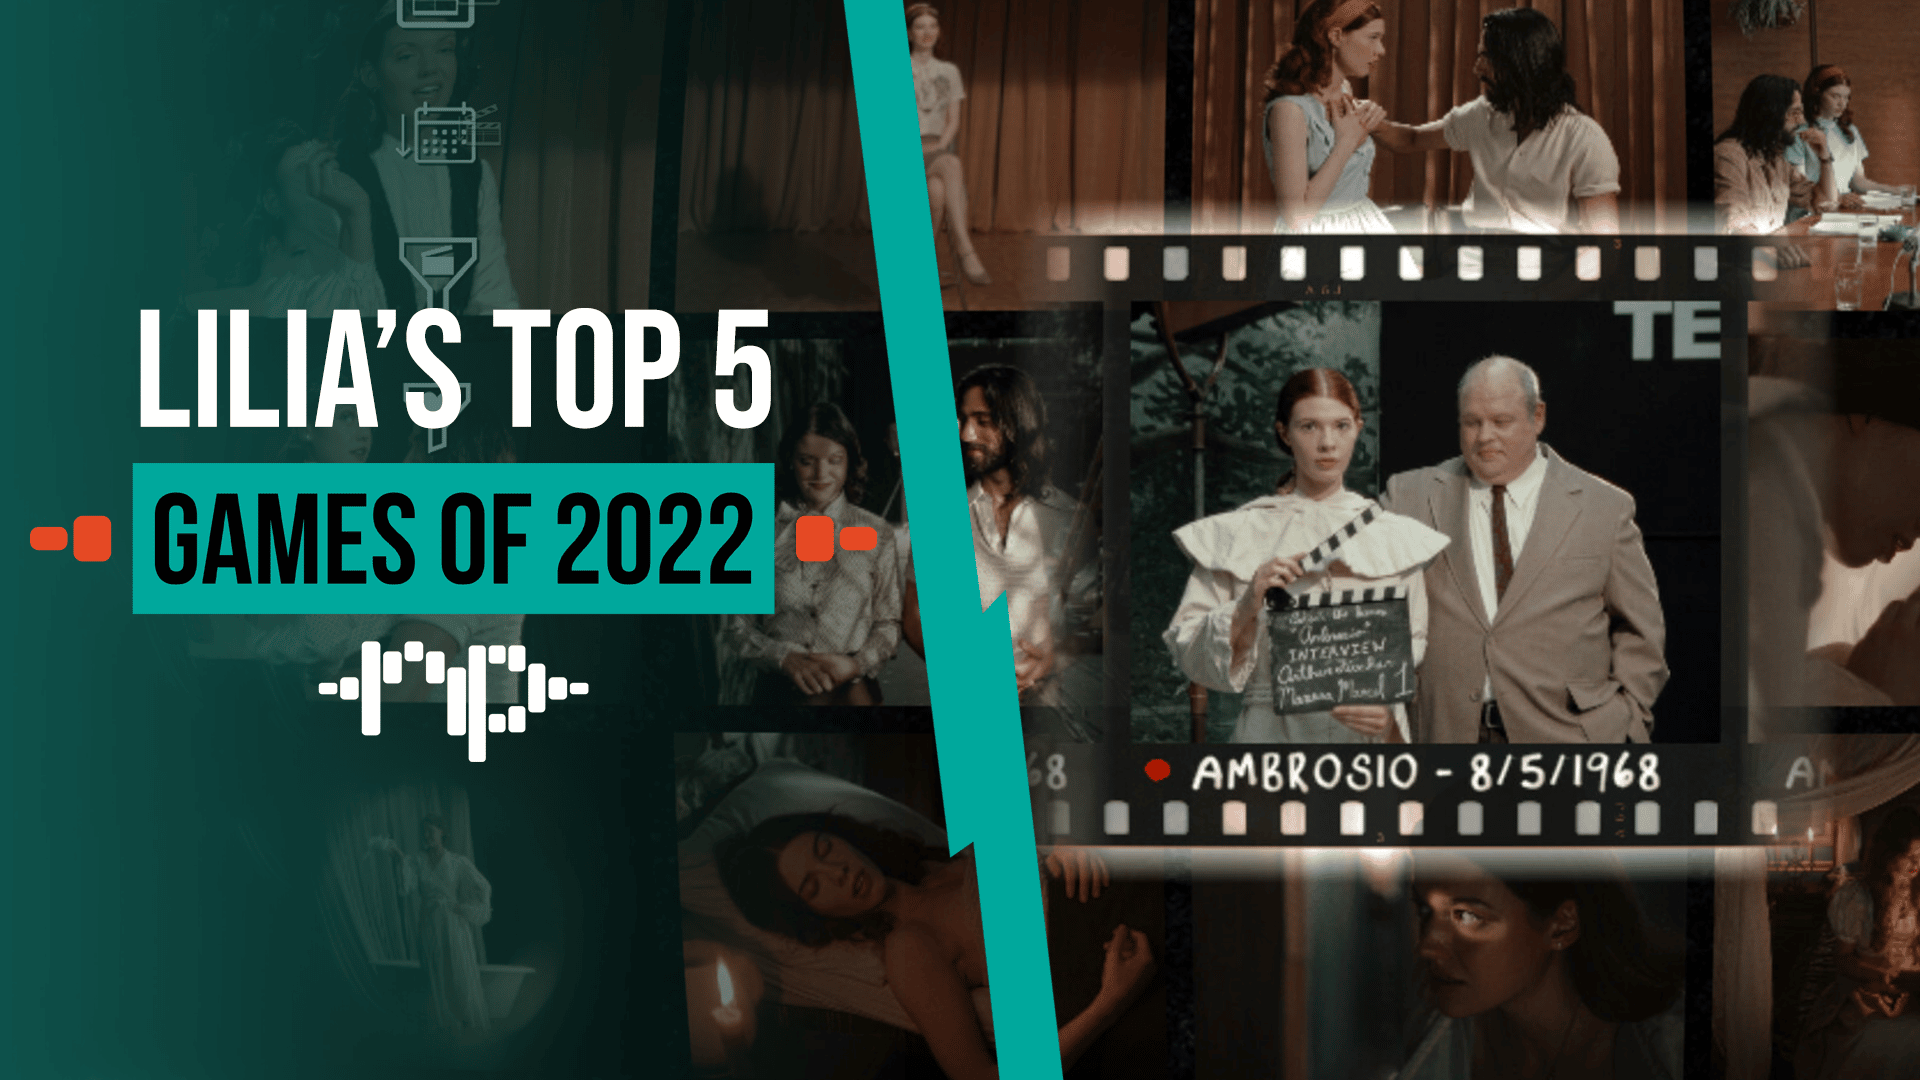 Best Games of 2022: Lilia’s Top 5 Games of 2022